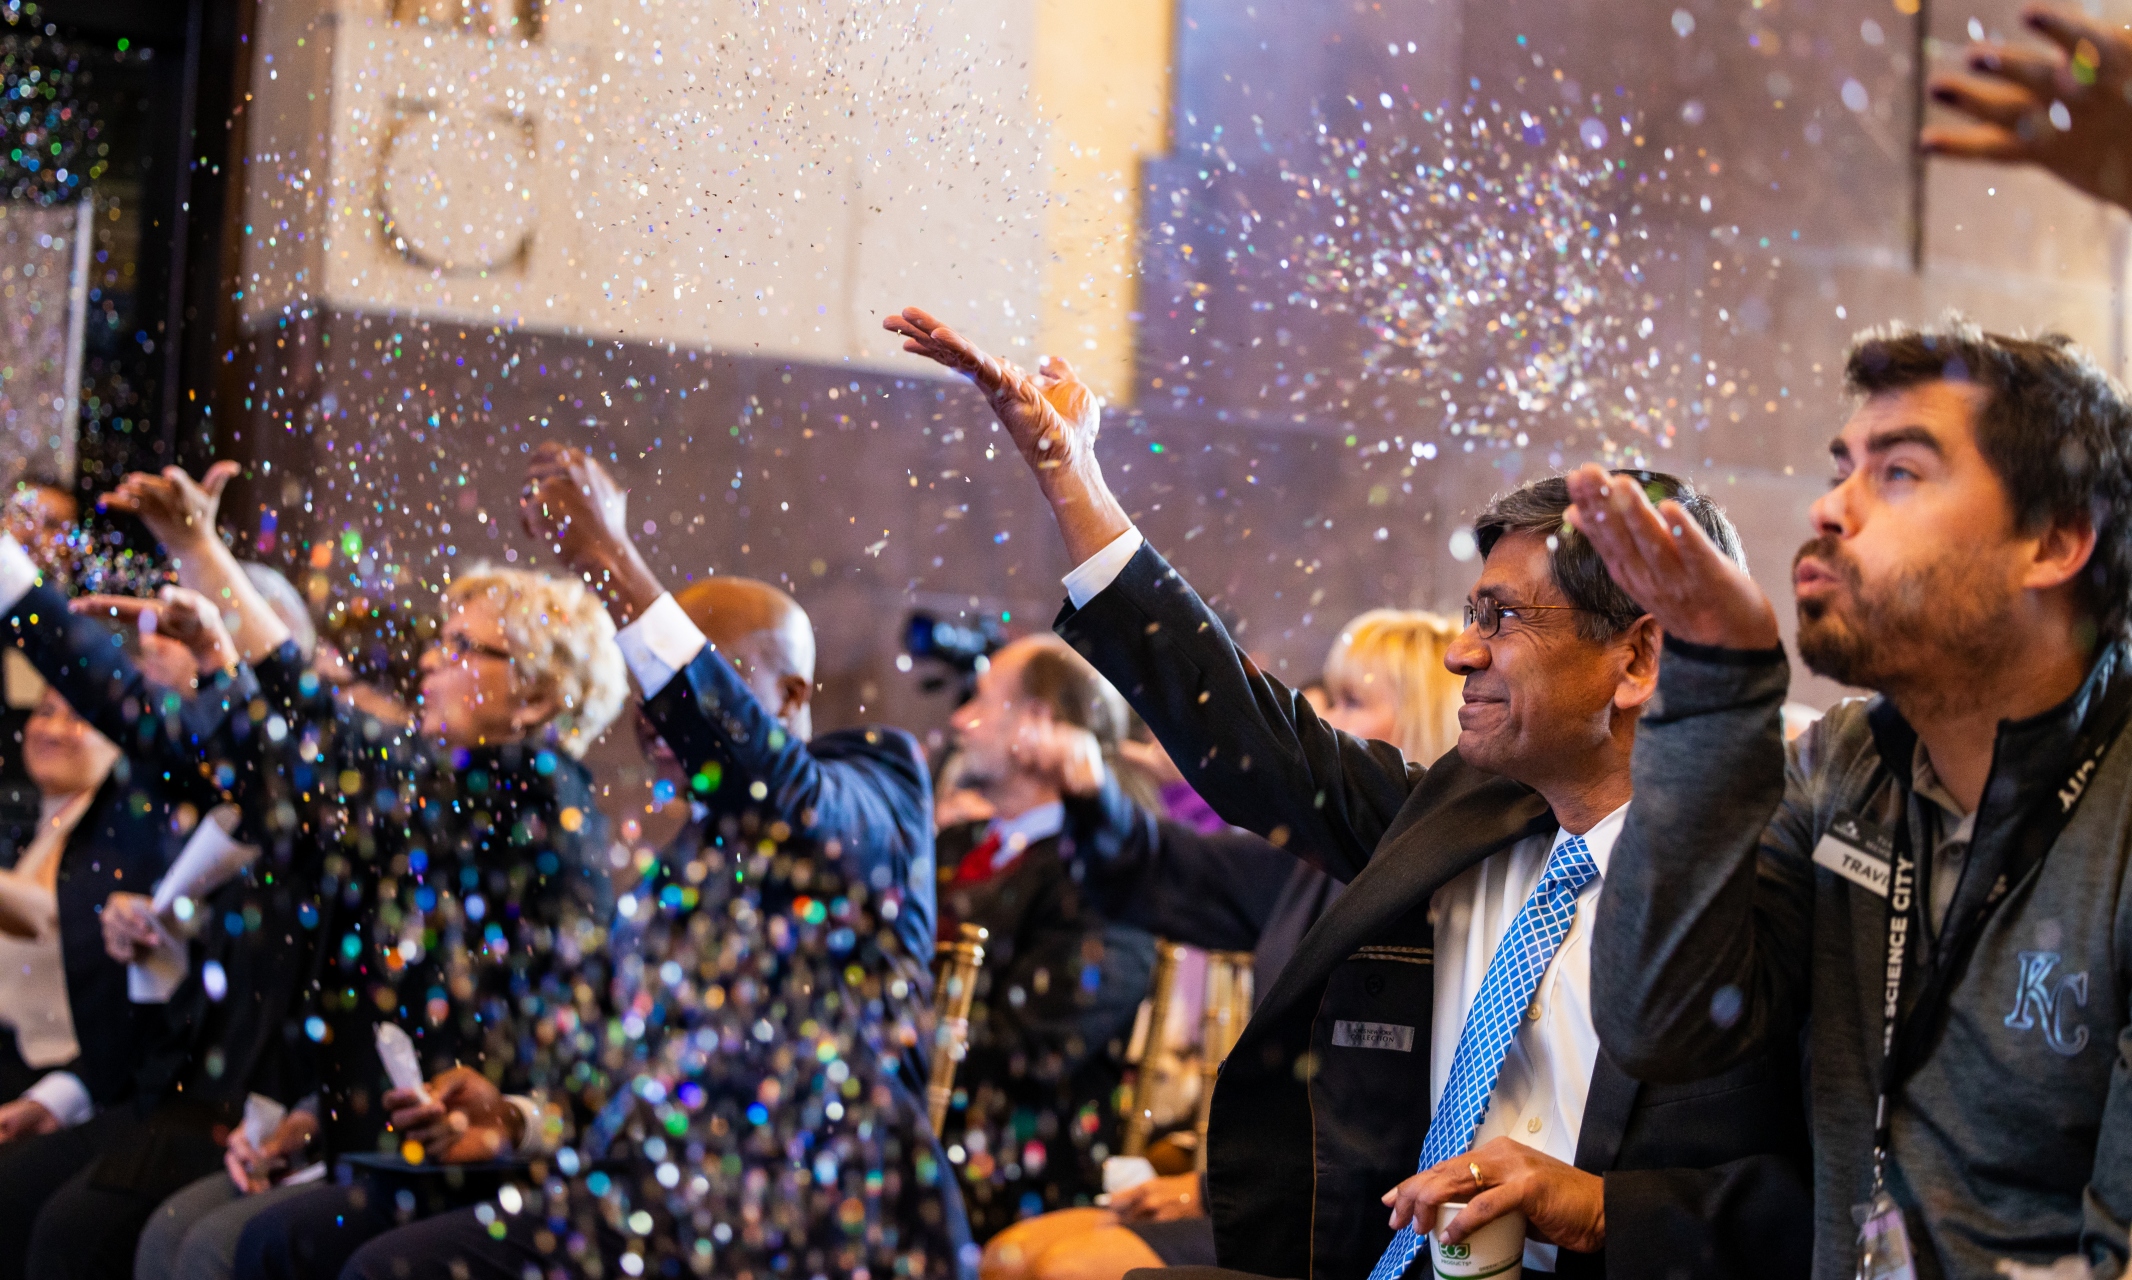 Chancellor with confetti at Disney announcement at Union Station